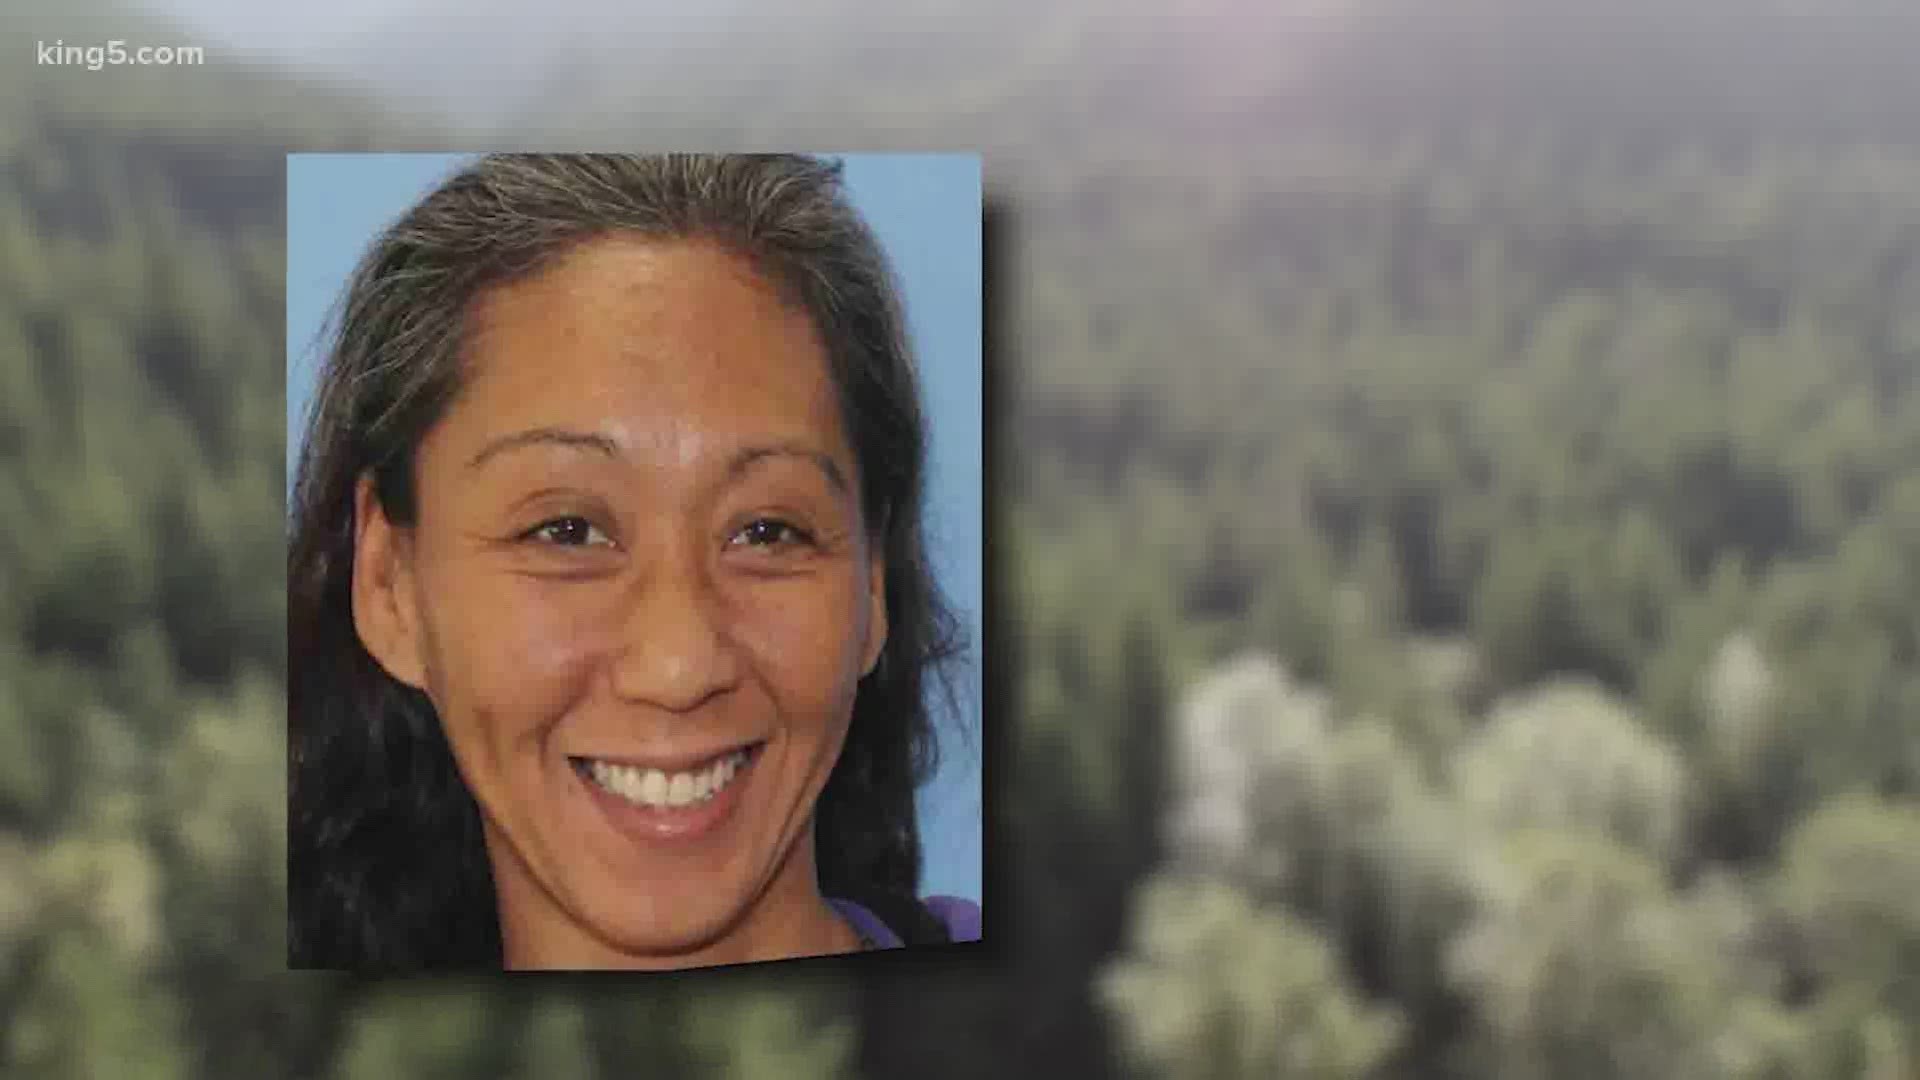 Auburn woman Diana Davis was reported missing after her car was found on fire in Tacoma on July 29.